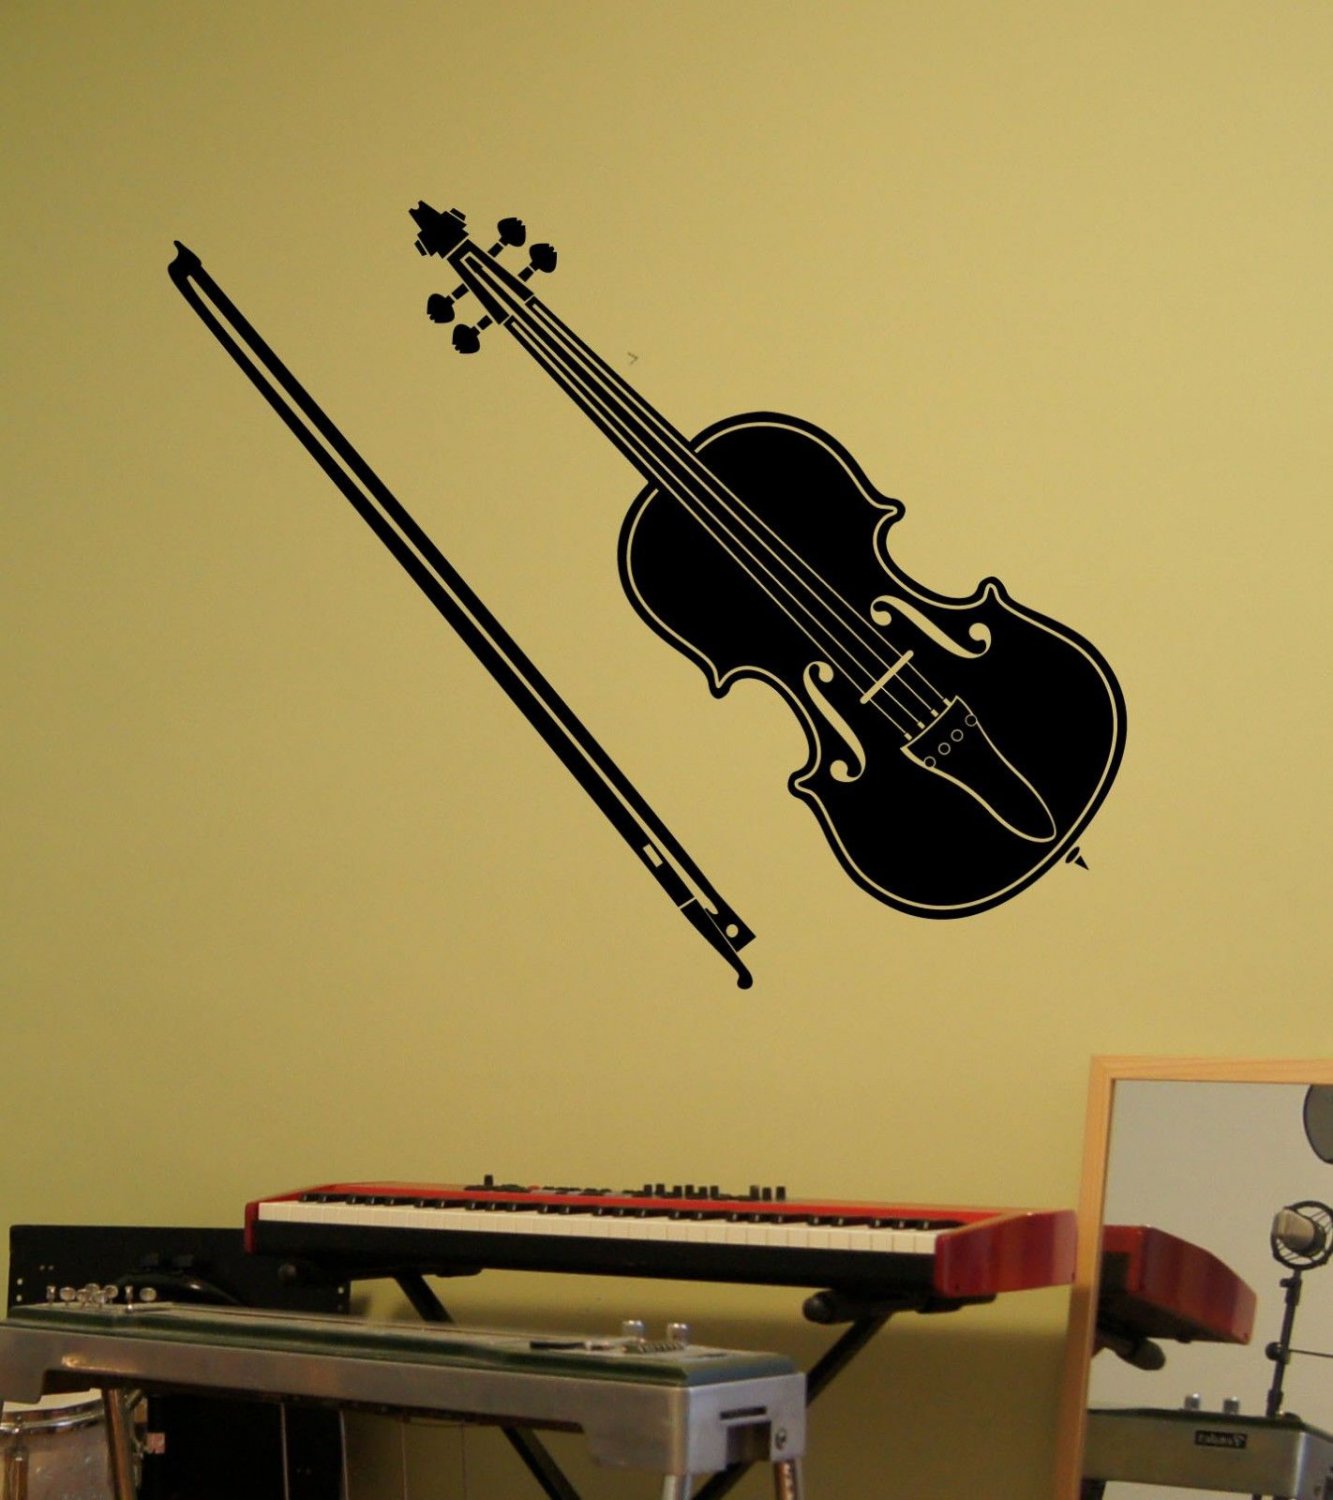 Violin and Bow Musical Instrument Vinyl Wall Sticker Decal 21"h x 48"w